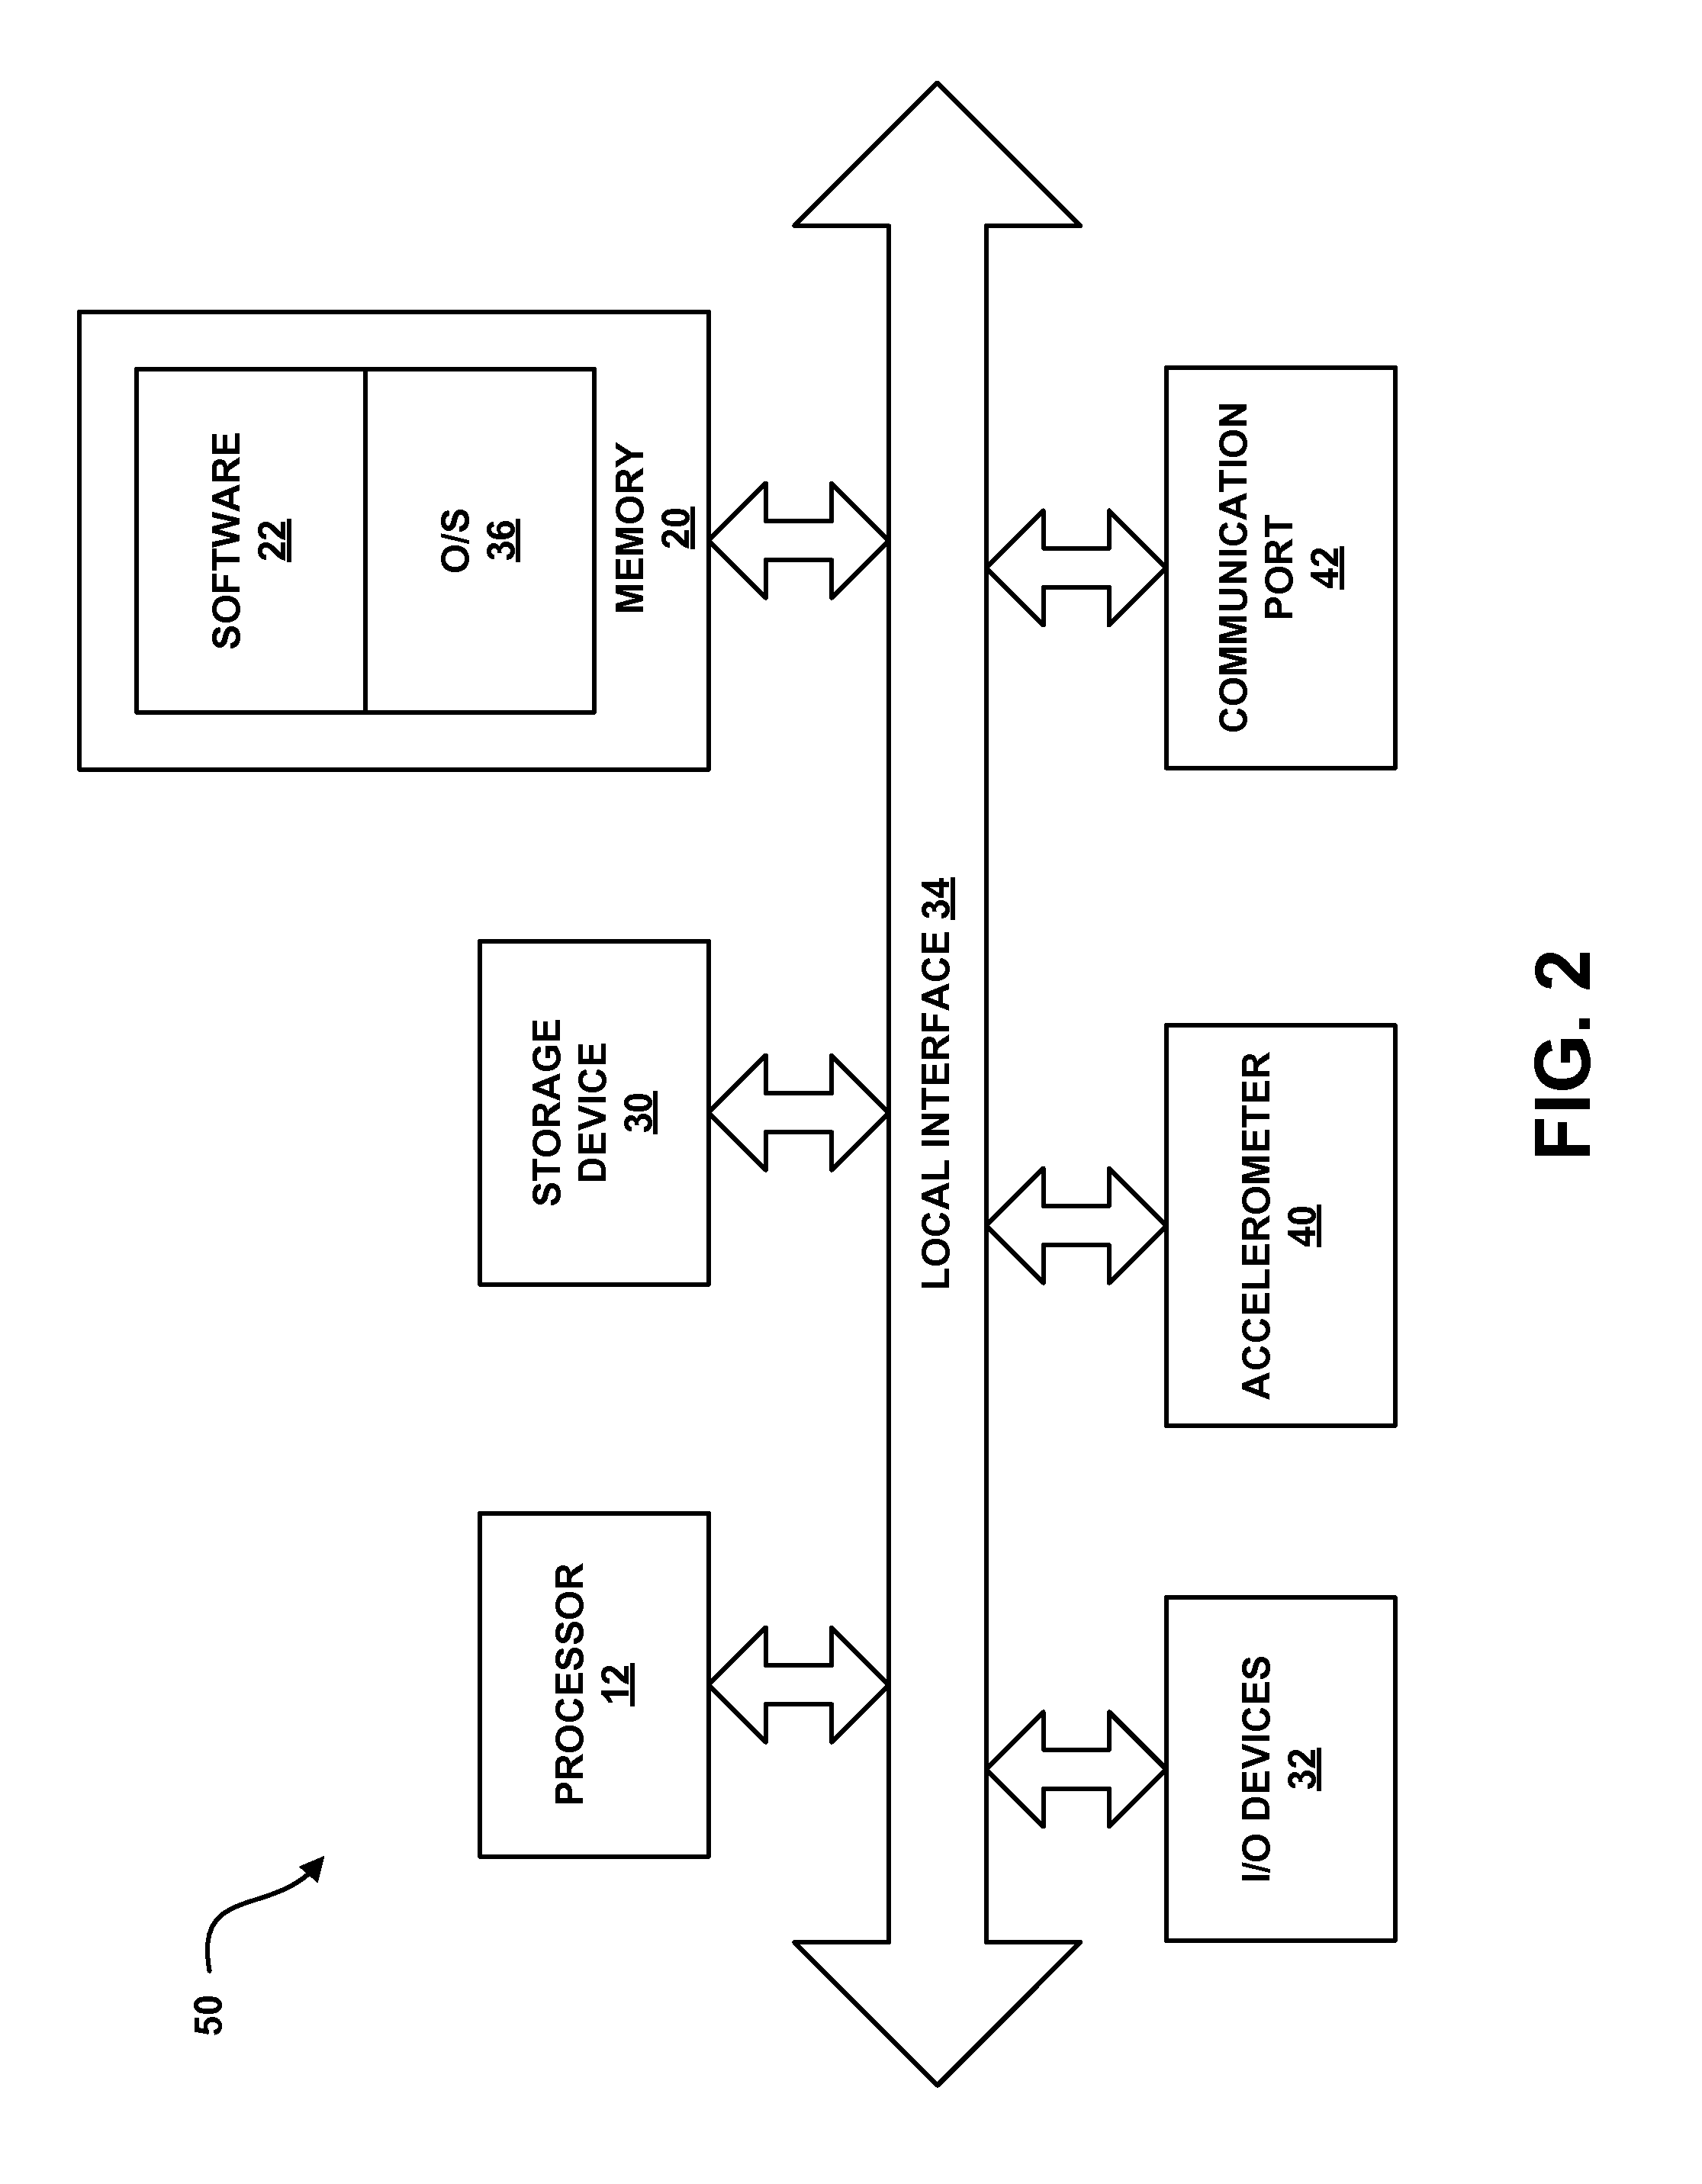 System and method for providing a virtual collaborative environment